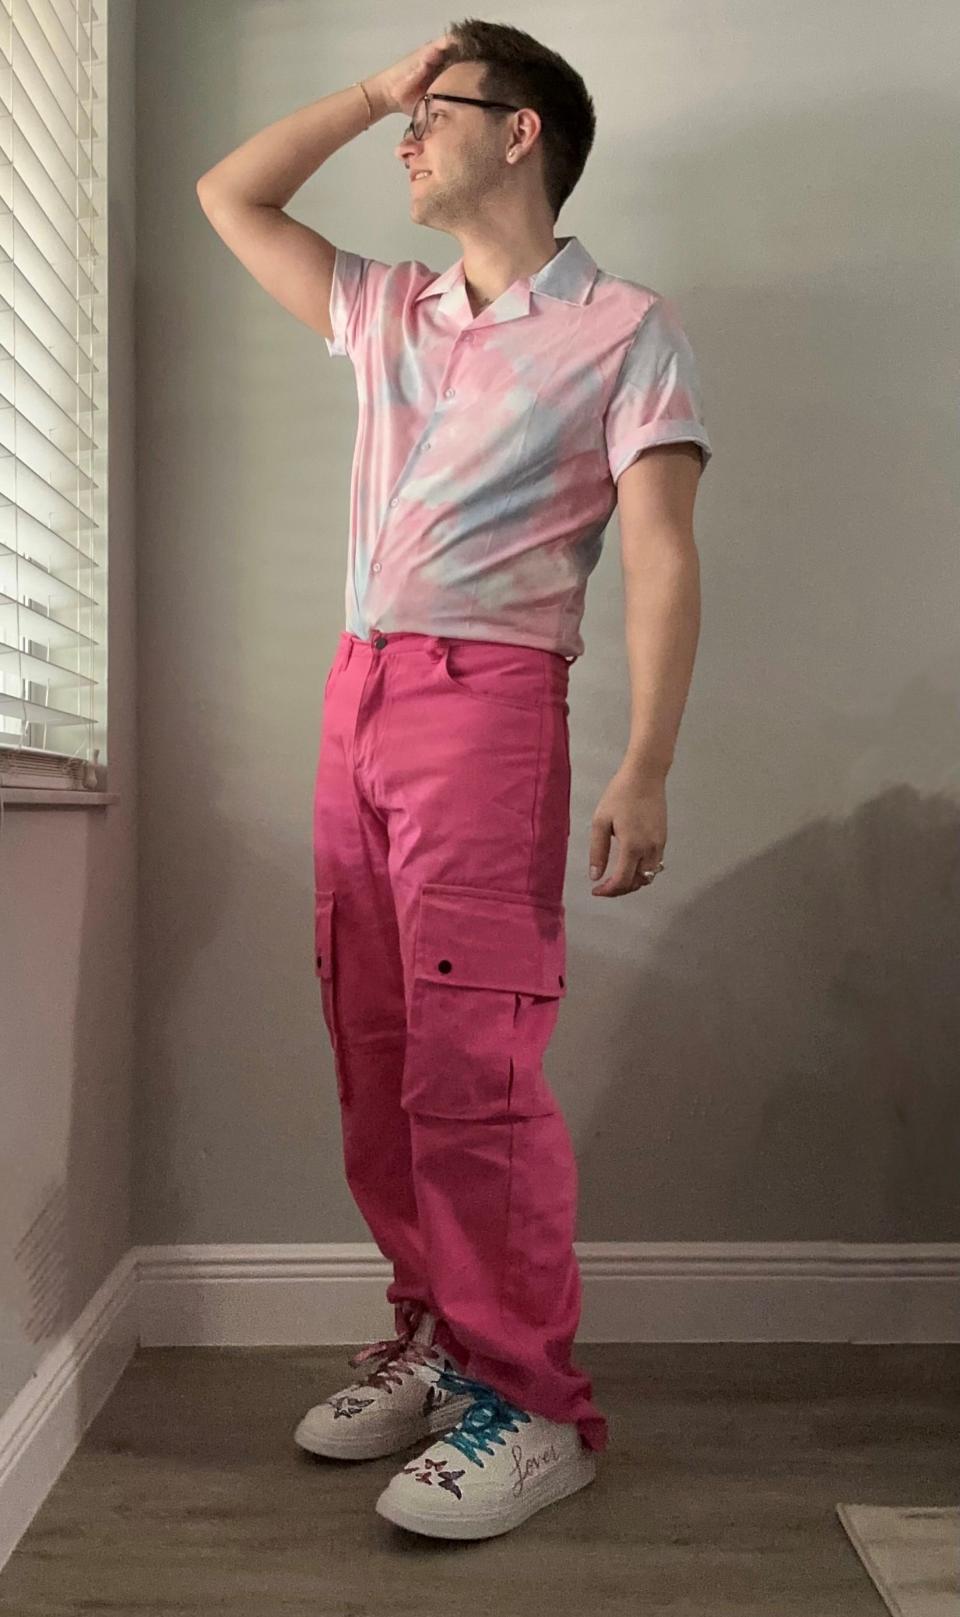 TikToker @DevenAnthony prepared a "Lover"-inspired outfit to see Taylor Swift when she launches her Eras Tour at State Farm Stadium in Glendale, Arizona, on March 17.